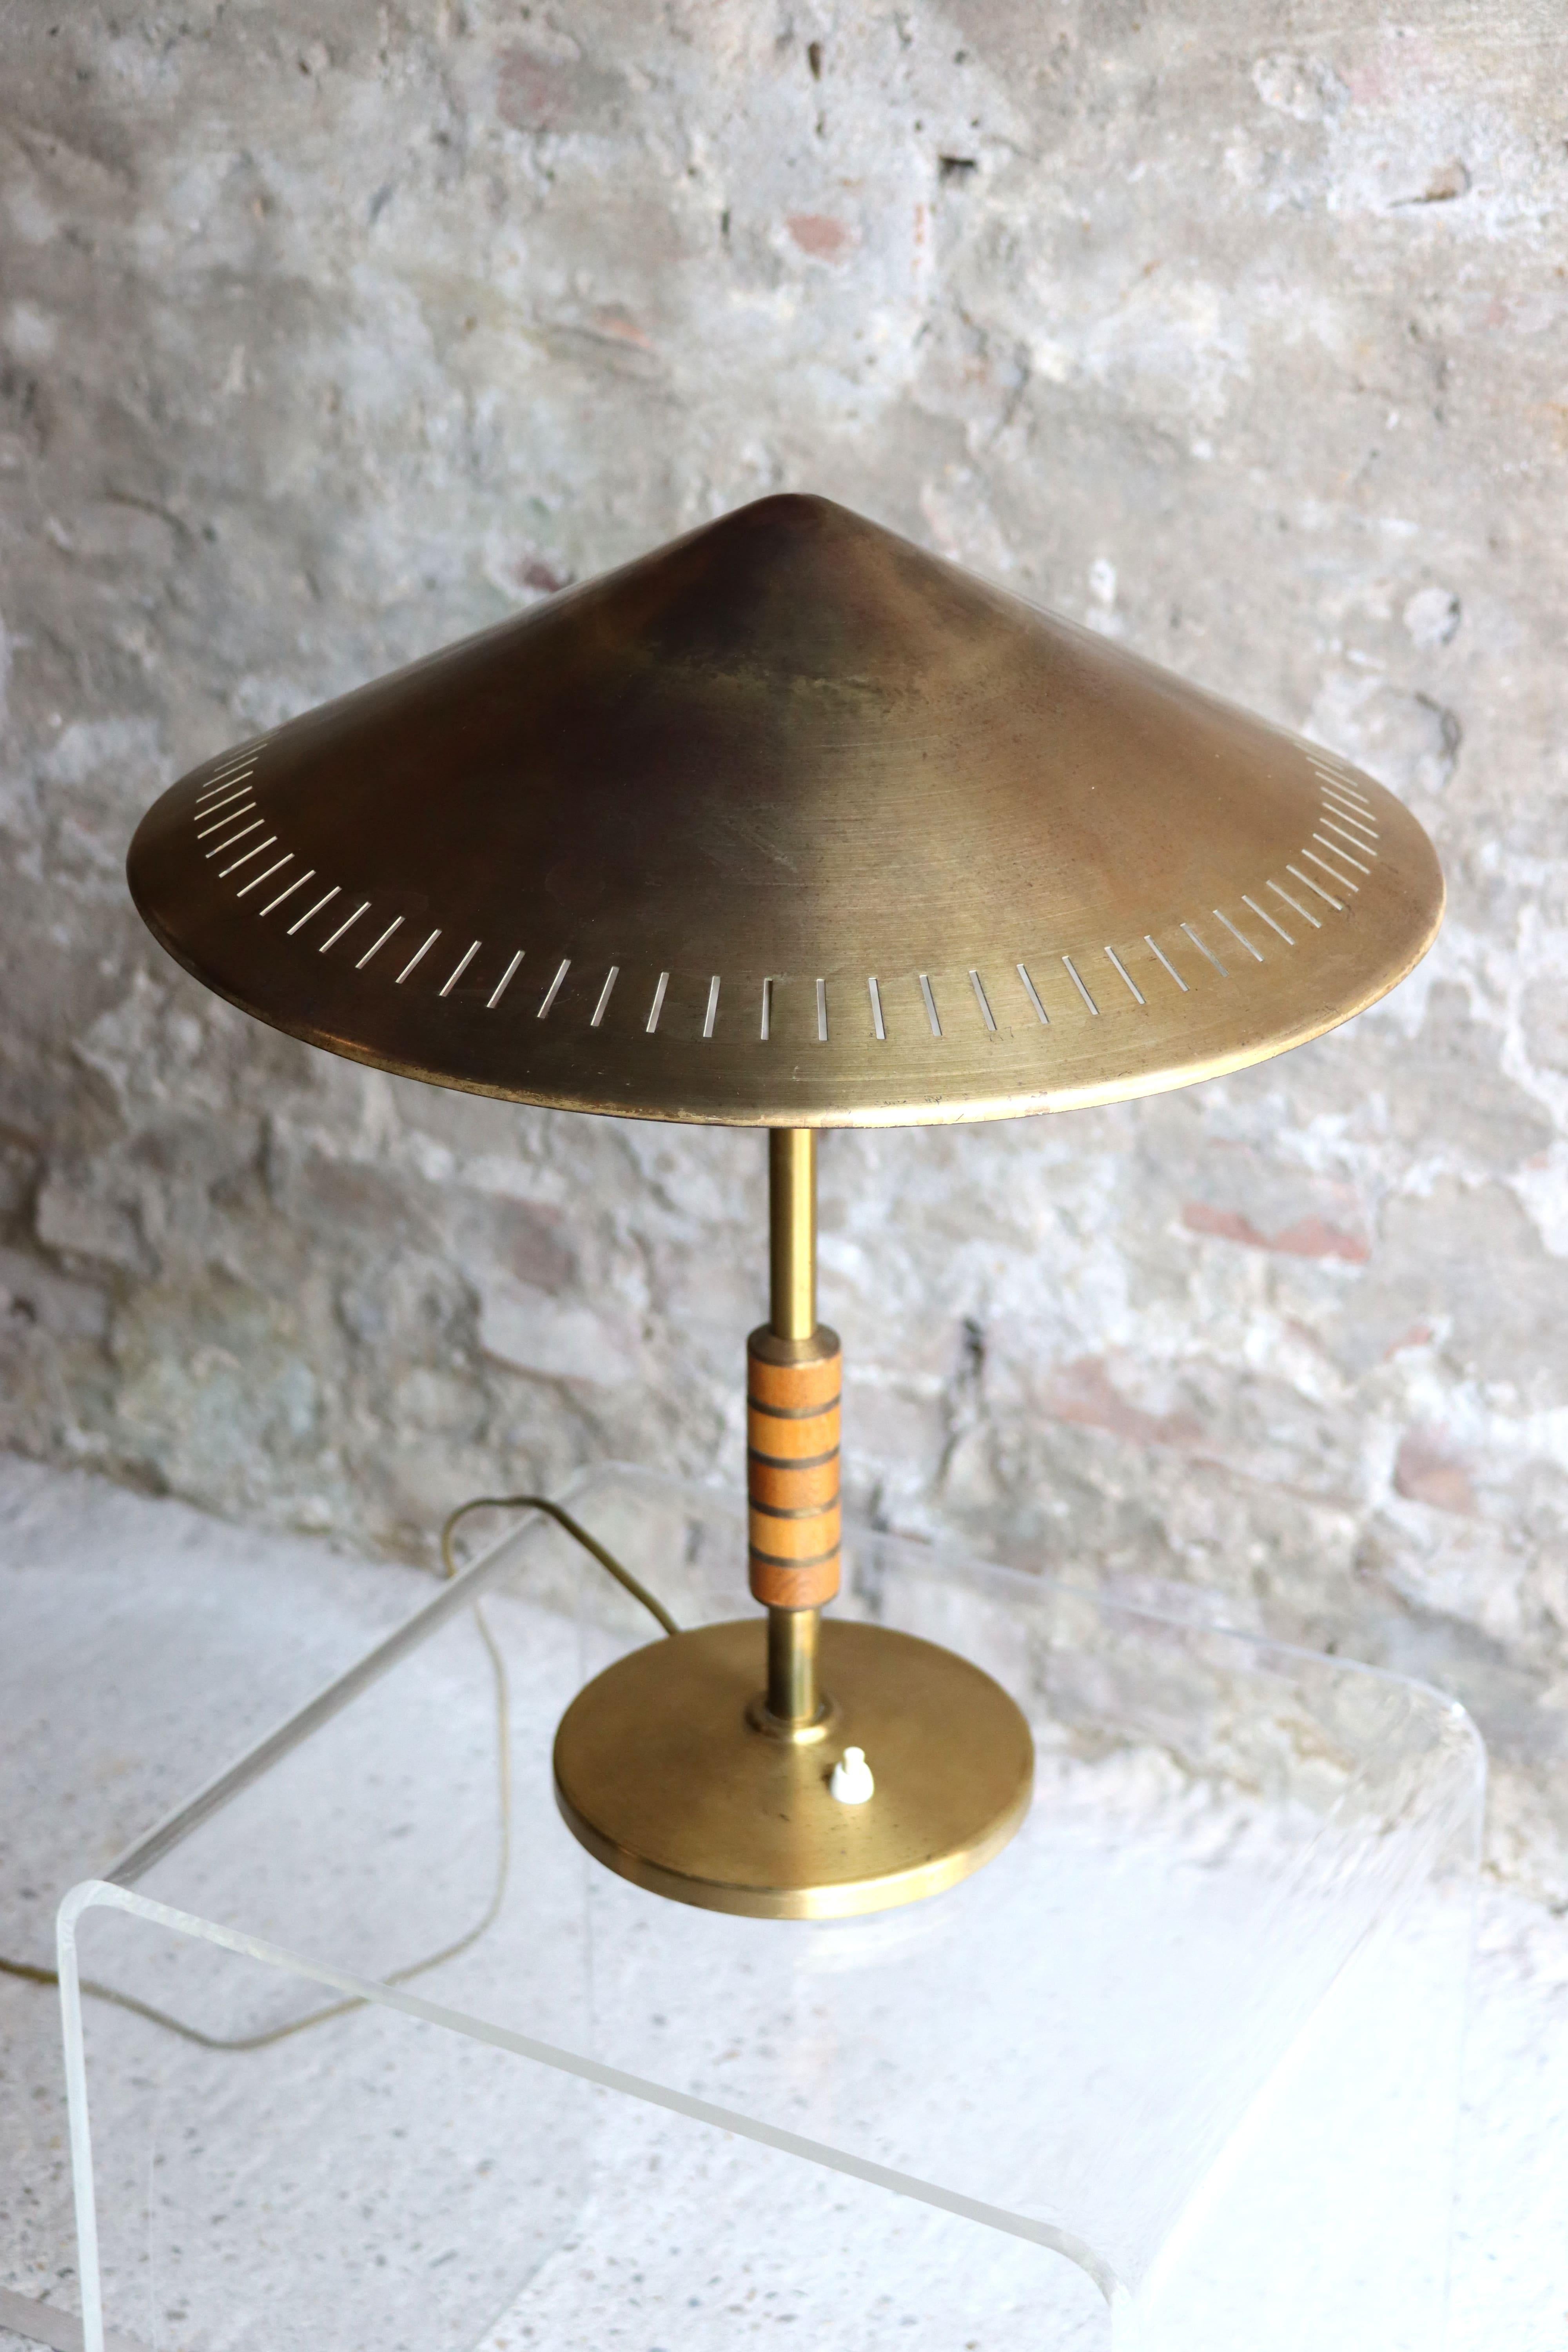 This beautiful Danish table lamp in solid brass with mahogany handle is designed by Bent Karlby in 1956. It is manufactured by LYFA, Copenhagen. This lamp is ultra rare and only a handful came on the market. It has a beautiful patina and marks of